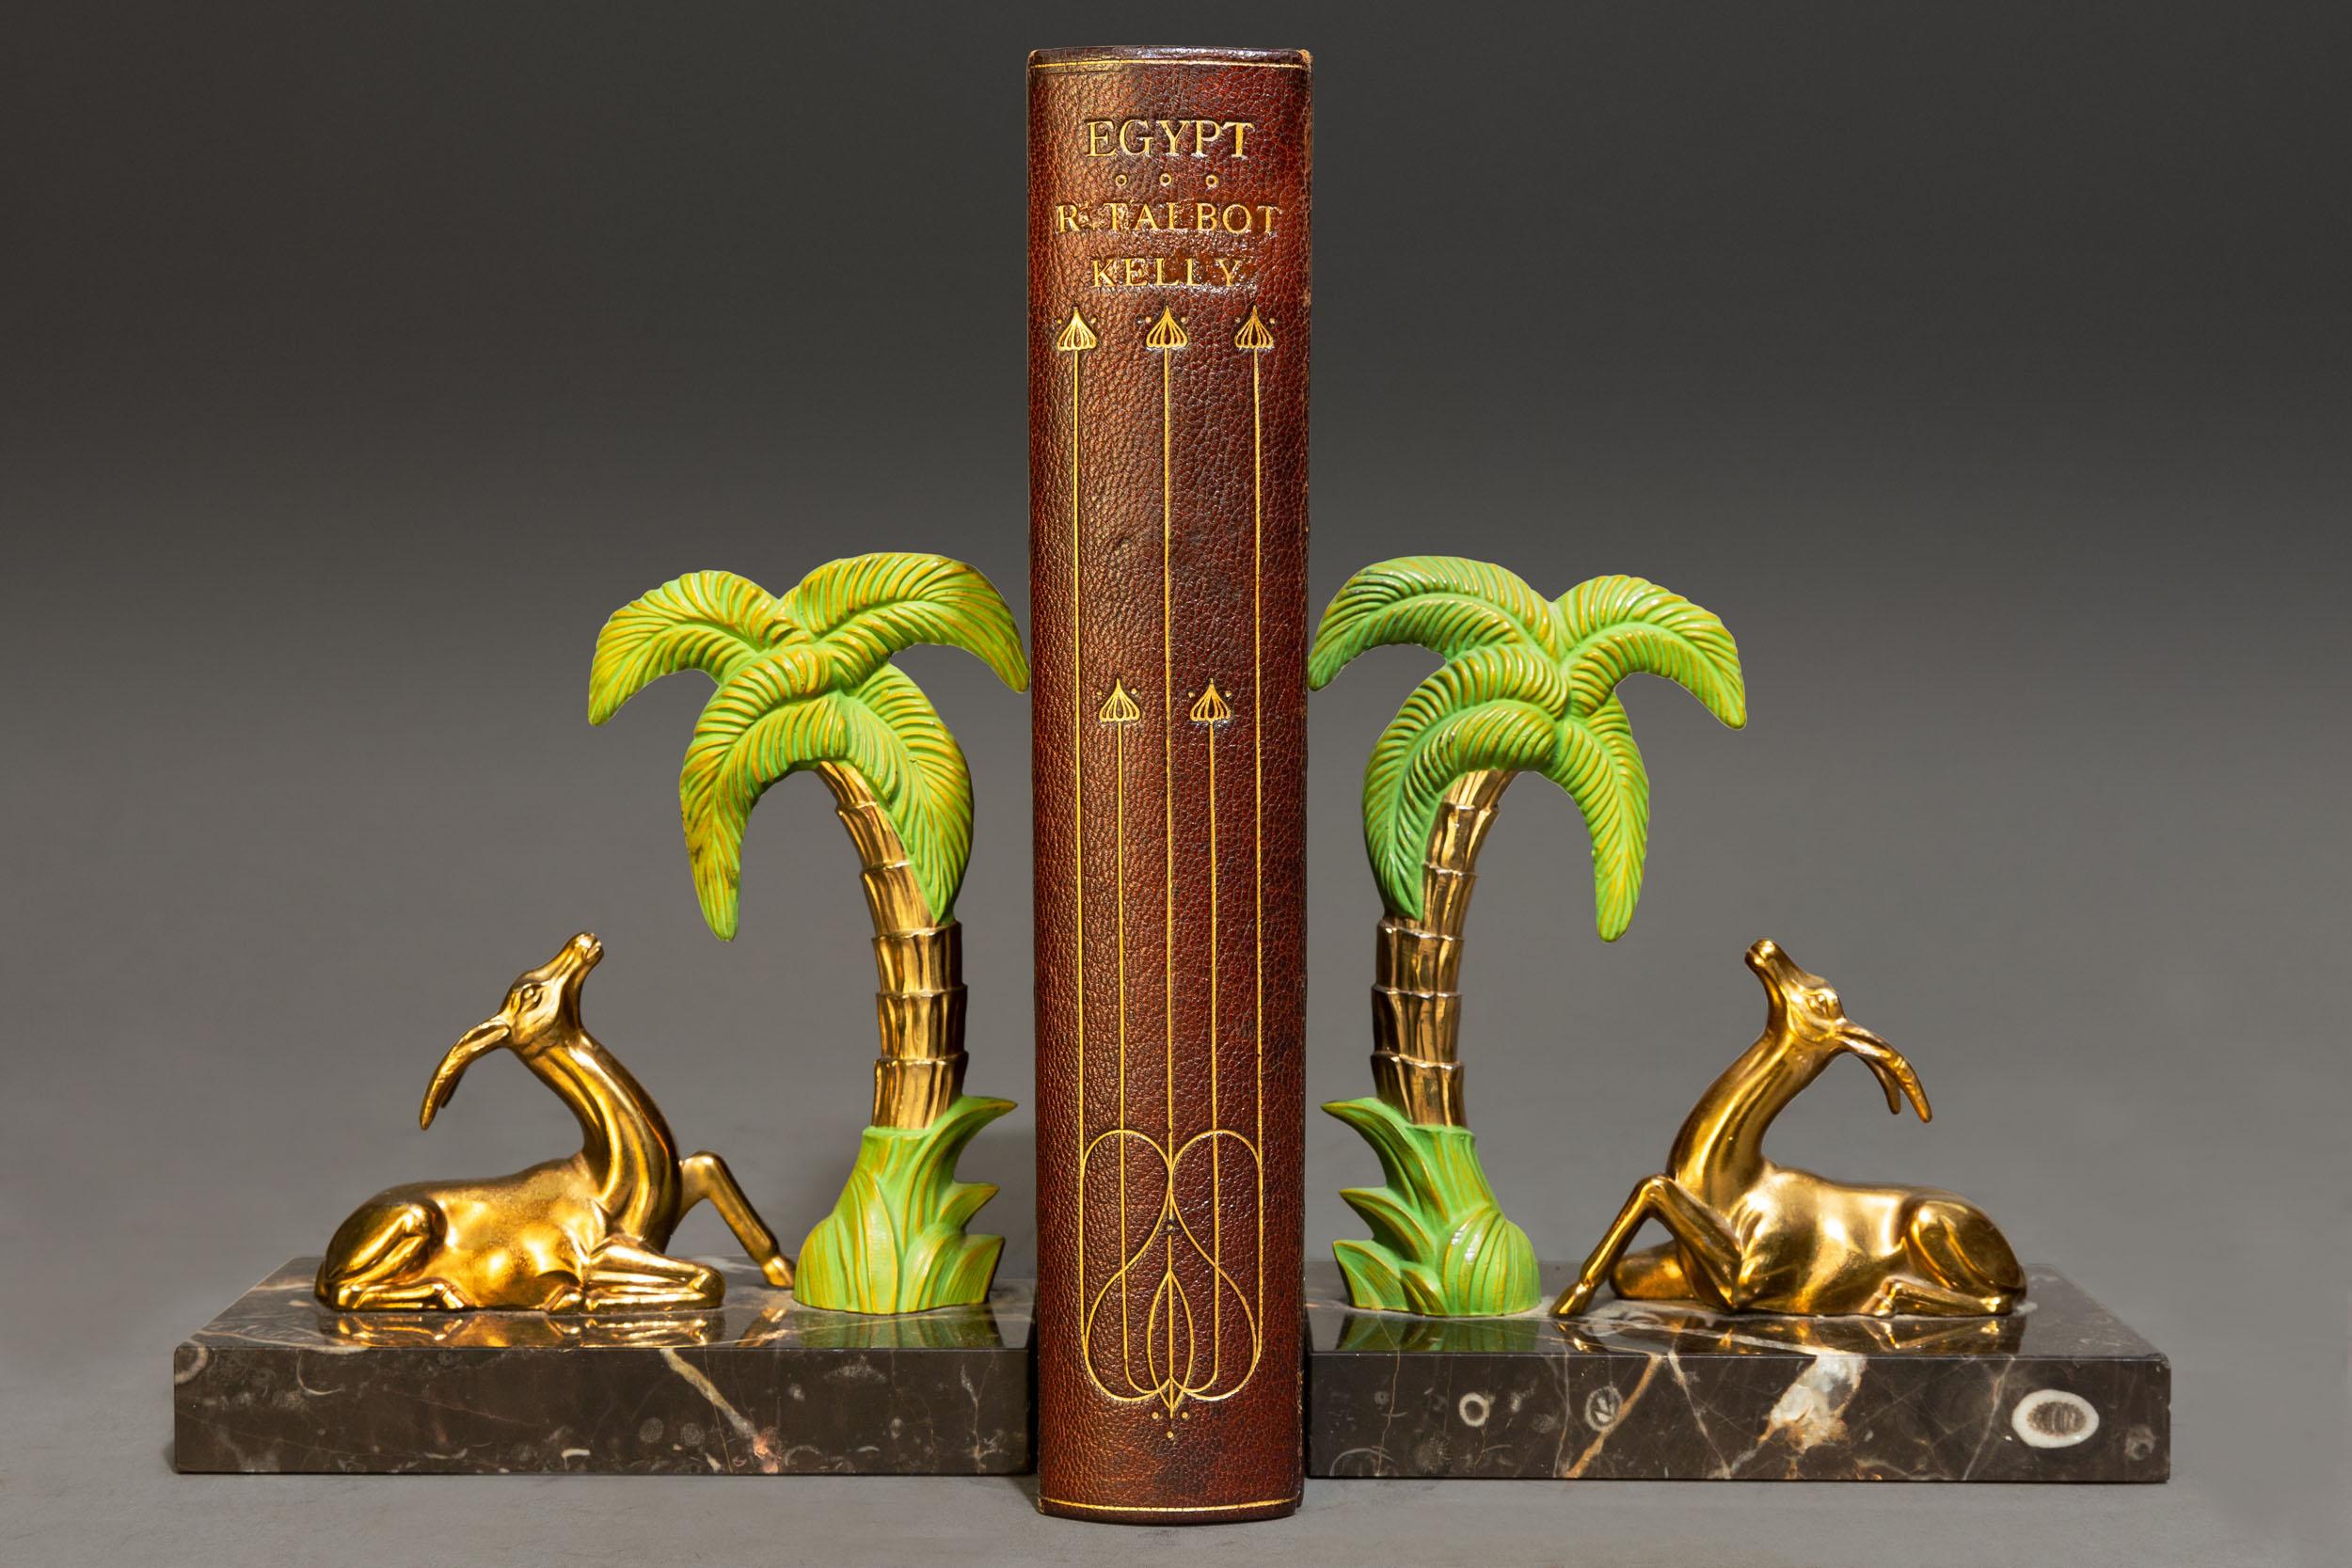 1 Volume. R. Talbot Kelly. Egypt. Painted & Described. Bound in full Wine Morocco with a painted on vellum on the front cover by Cedric Chivers, top edges gilt, gilt on covers & spine, illustrated with colored plates.
Published: London: Adam &